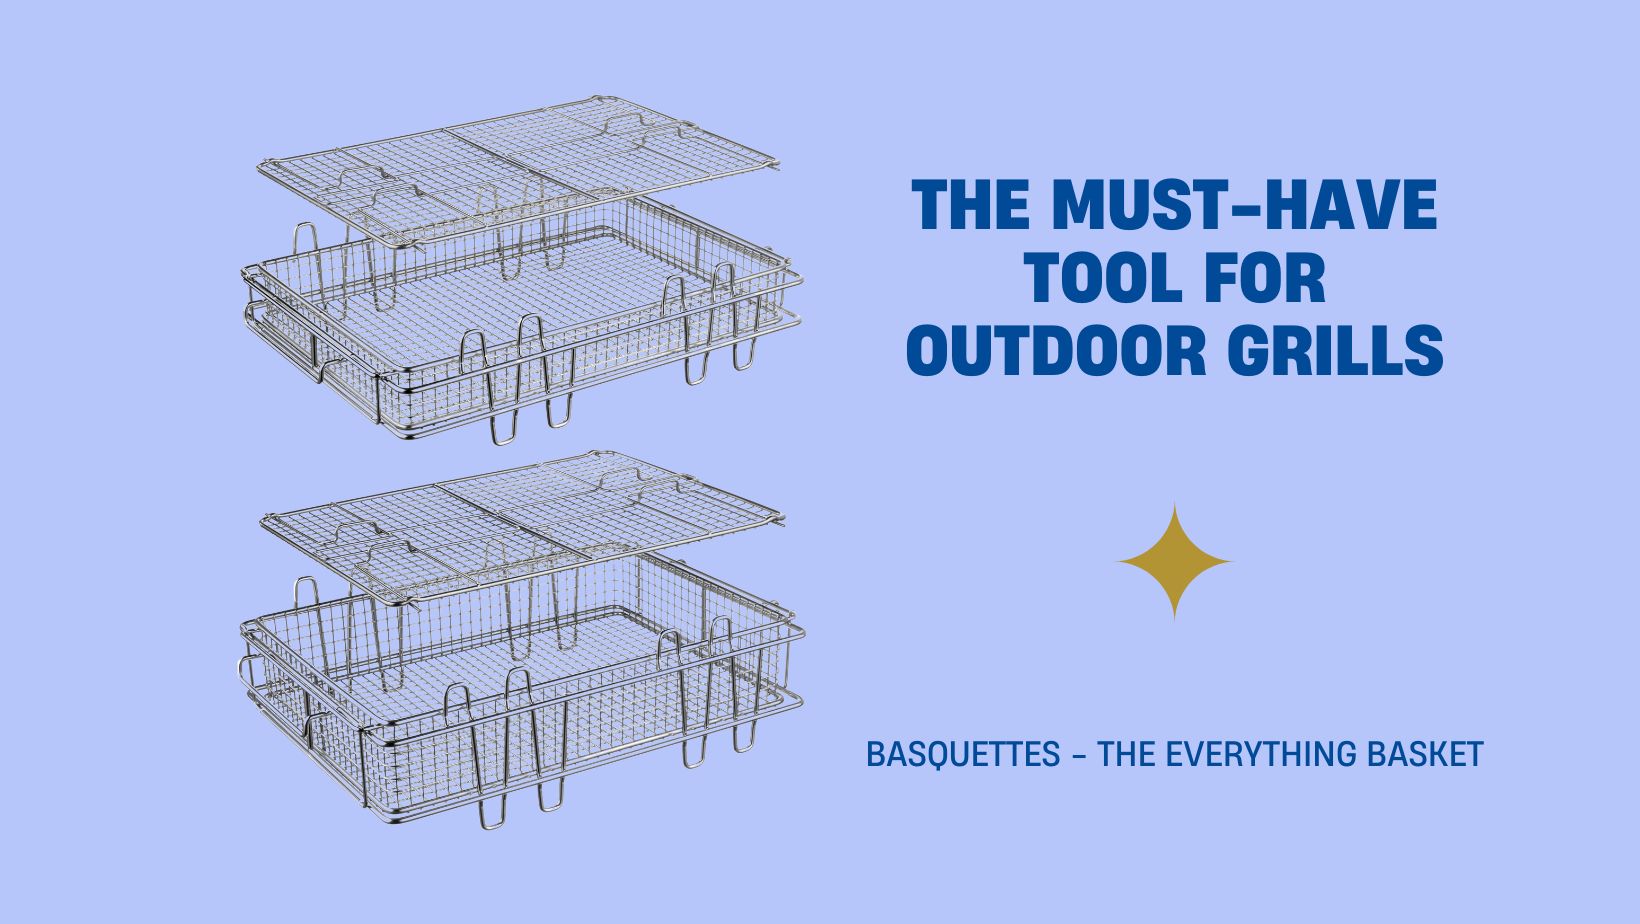 Basquettes is the must-have tool for outdoor grills.